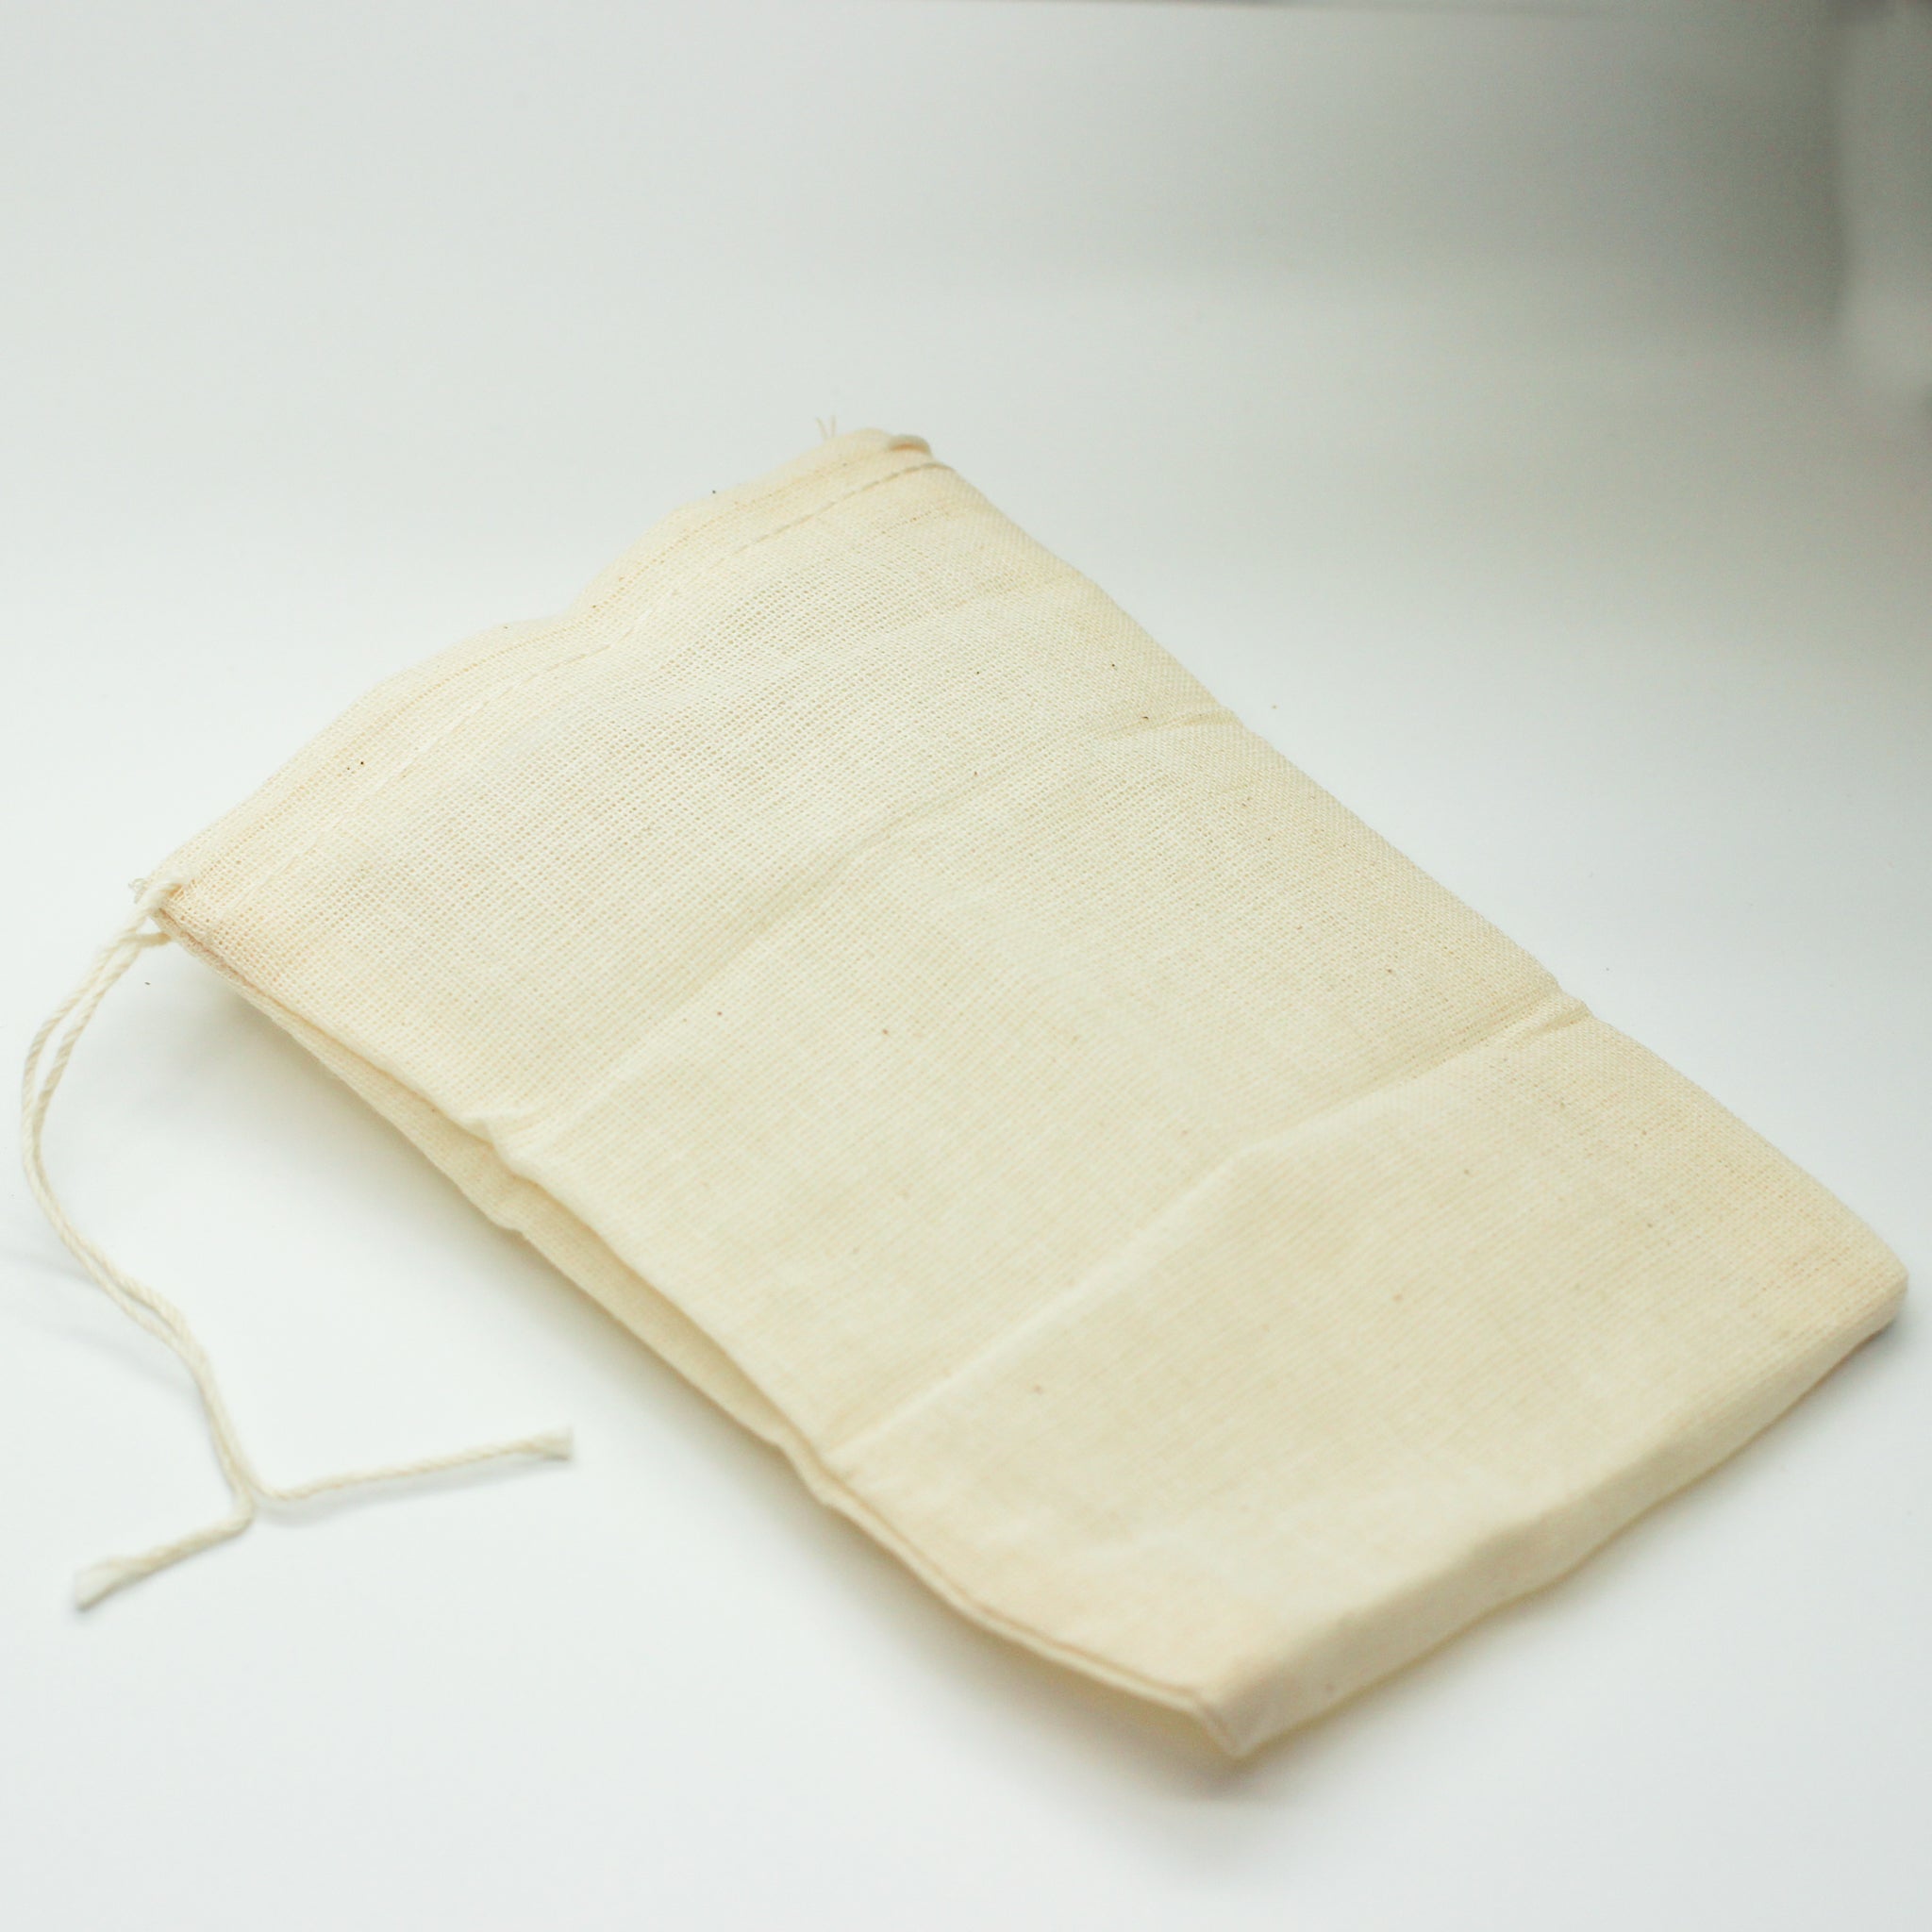 Cotton Muslin Bags 4 X 6 set of 3 Made in U.S.A. Reusable Gift, Favor,  Treat Bags / Small Parts, Toys Organization and Storage. - Etsy